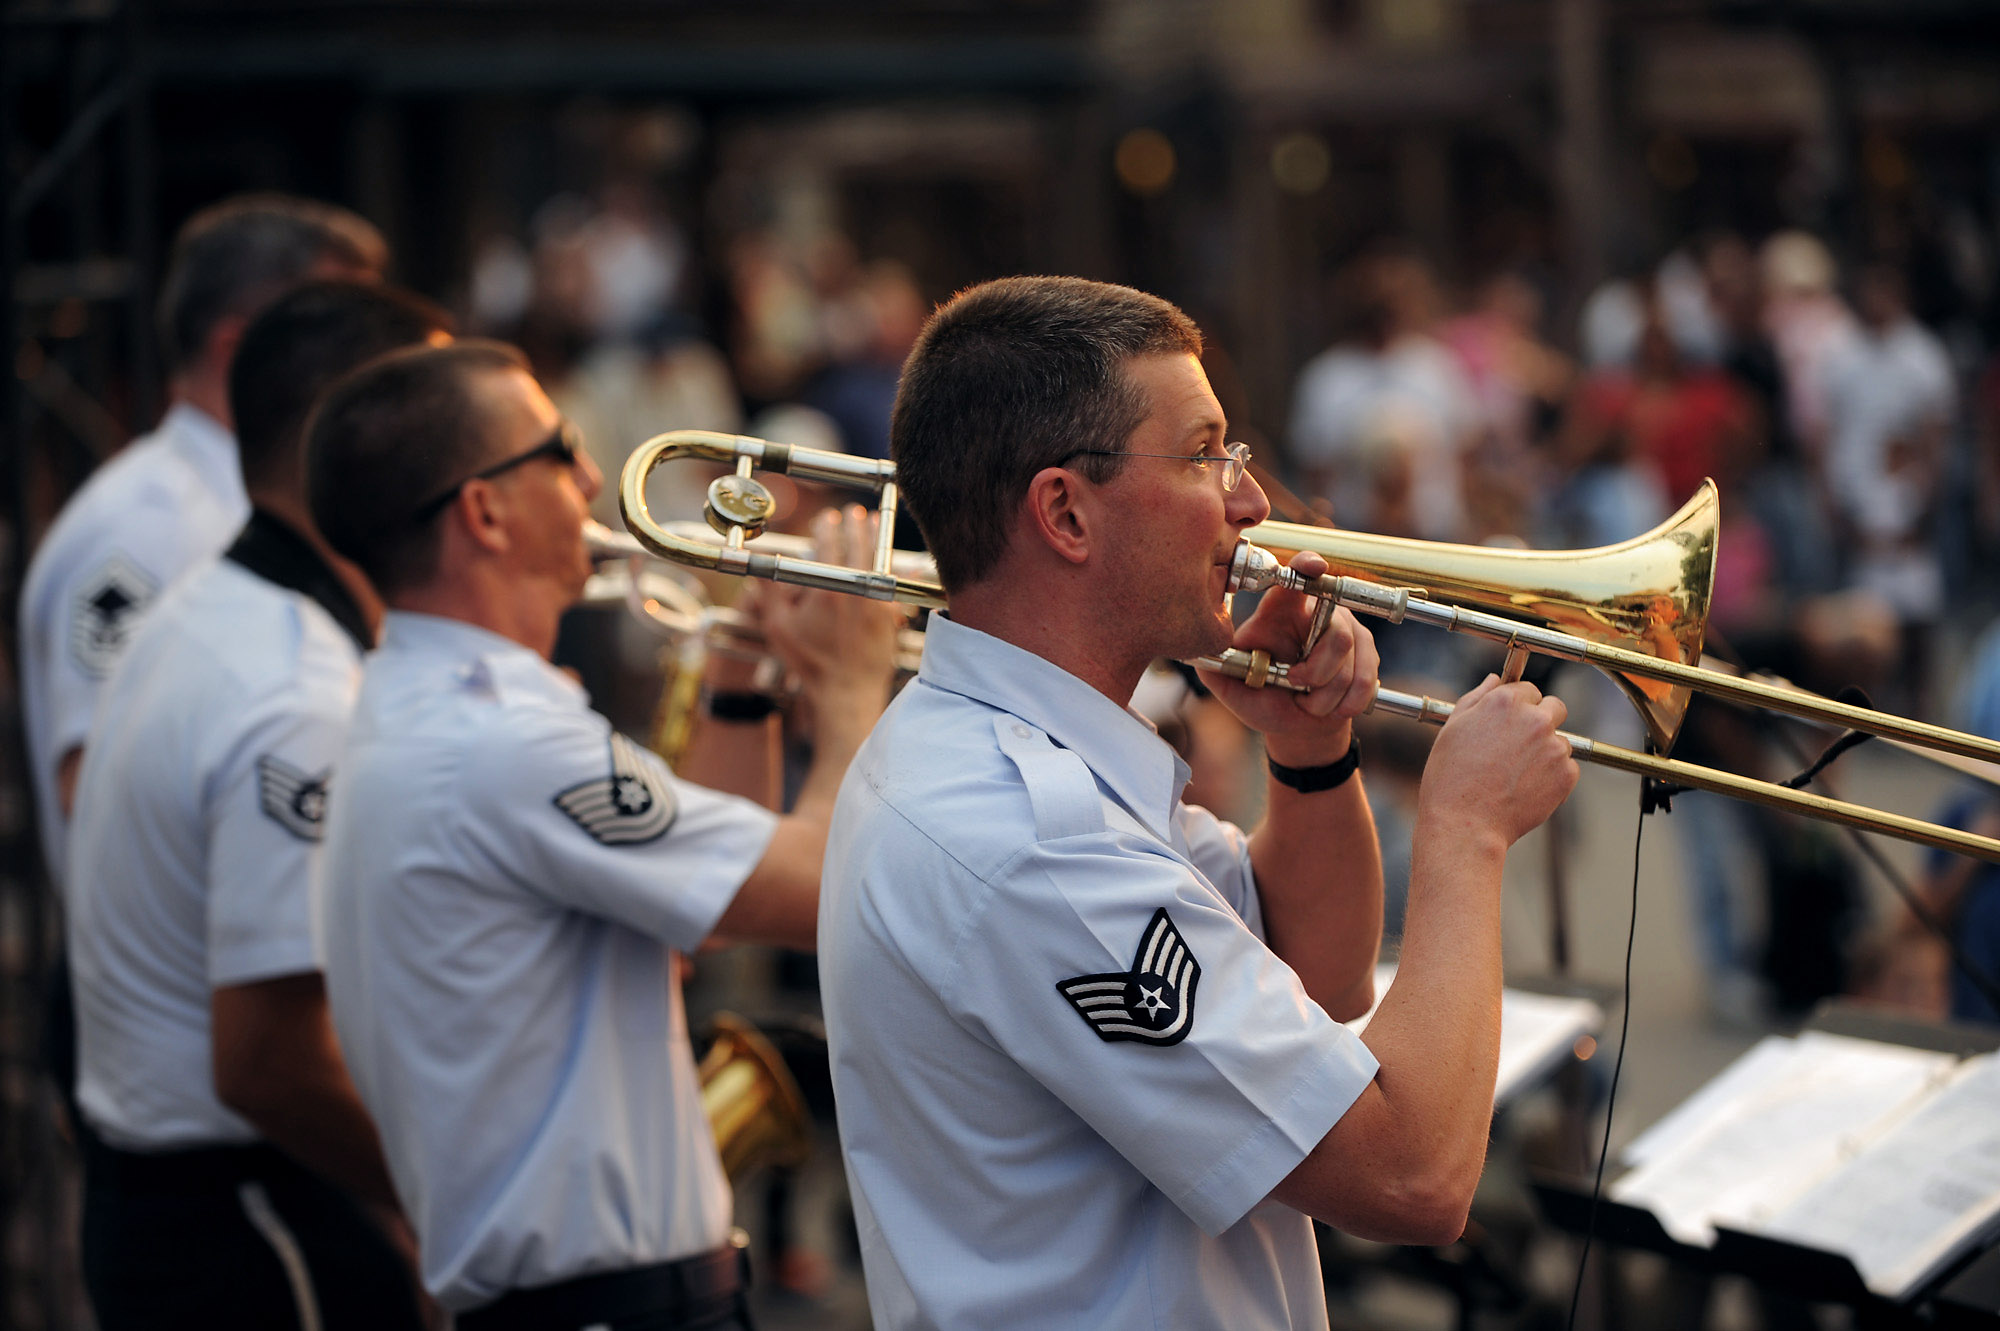 Bands spread Air Force message through music